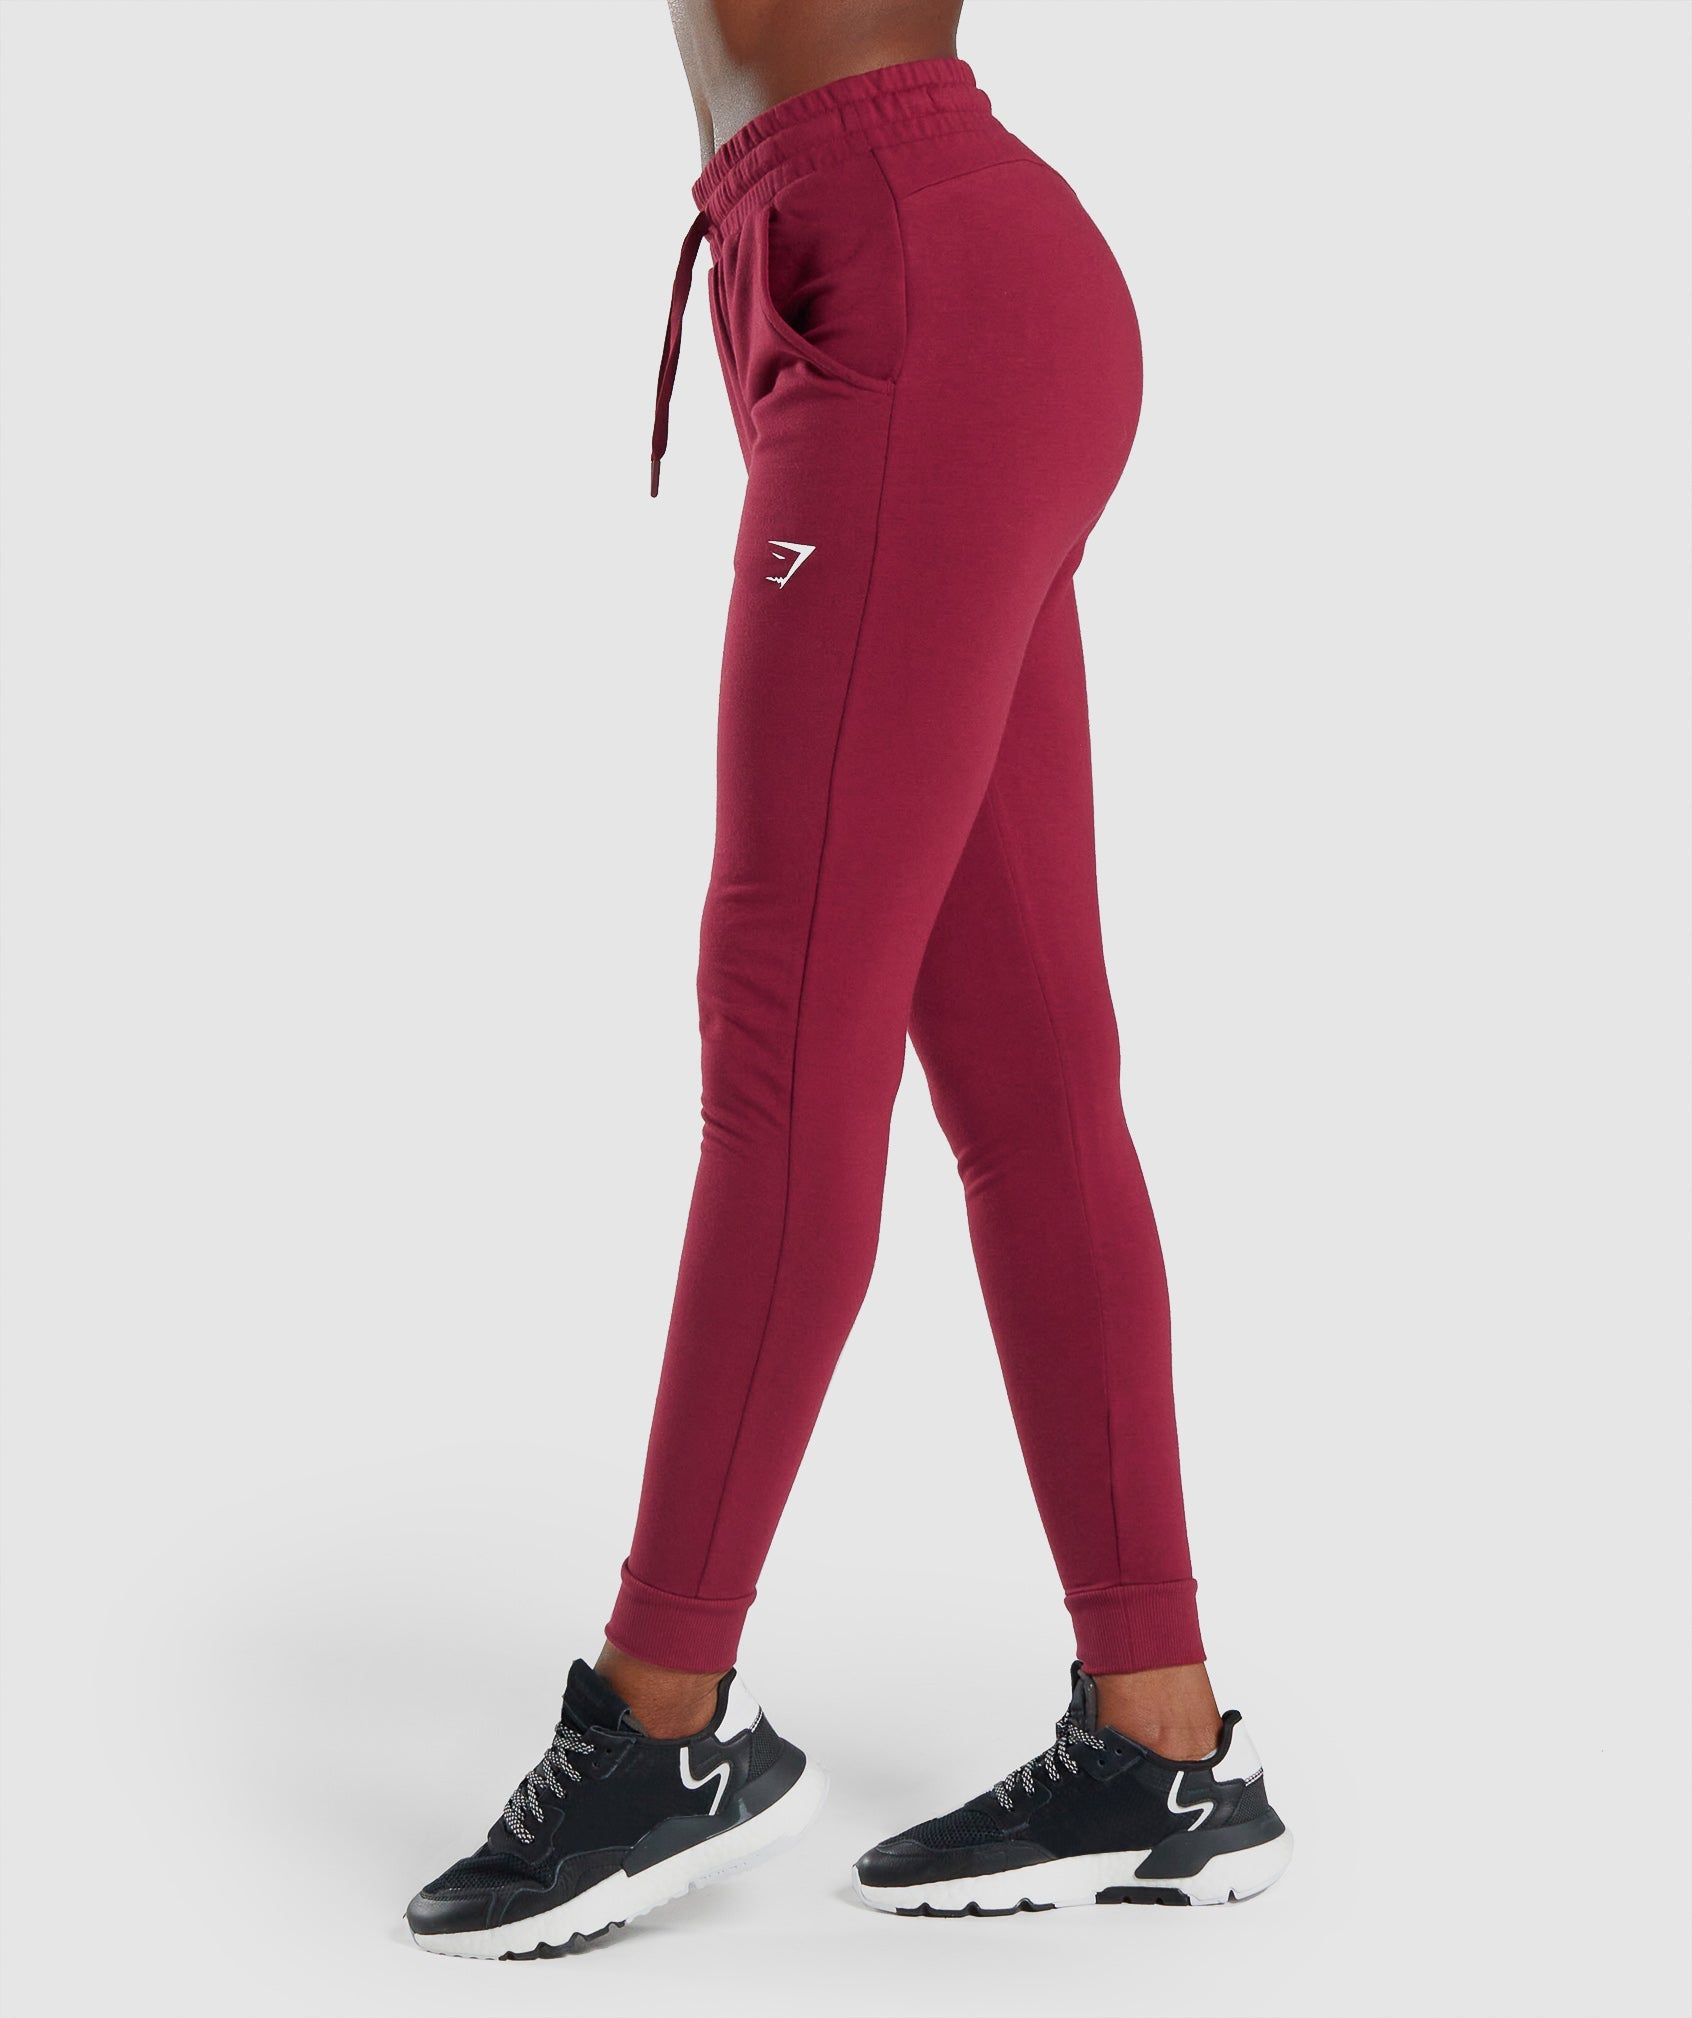 Pippa Training Joggers in Burgundy - view 3